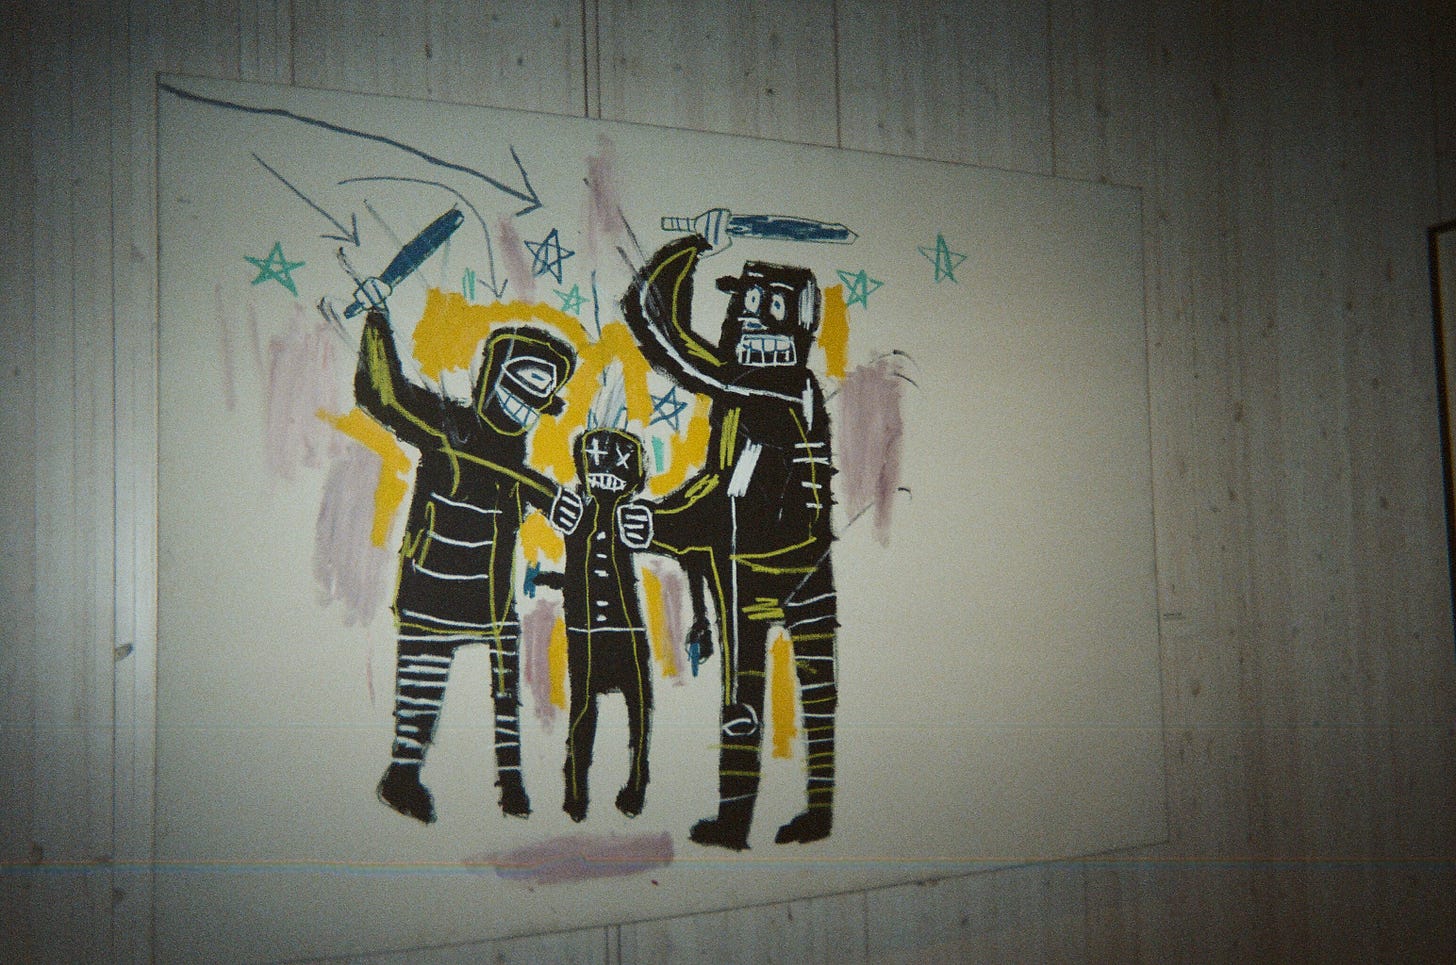 a picture of a portrait done by Basquiat: two police officers take batons to a Black boy holding a gun. The way he’s drawn the figures mimics a silhouete, with yellow and mauve colored in a round them. Stars radiate from the center of the piece, reminiscent of the way stars catapult from cartoon character’s heads when they get knocked around.